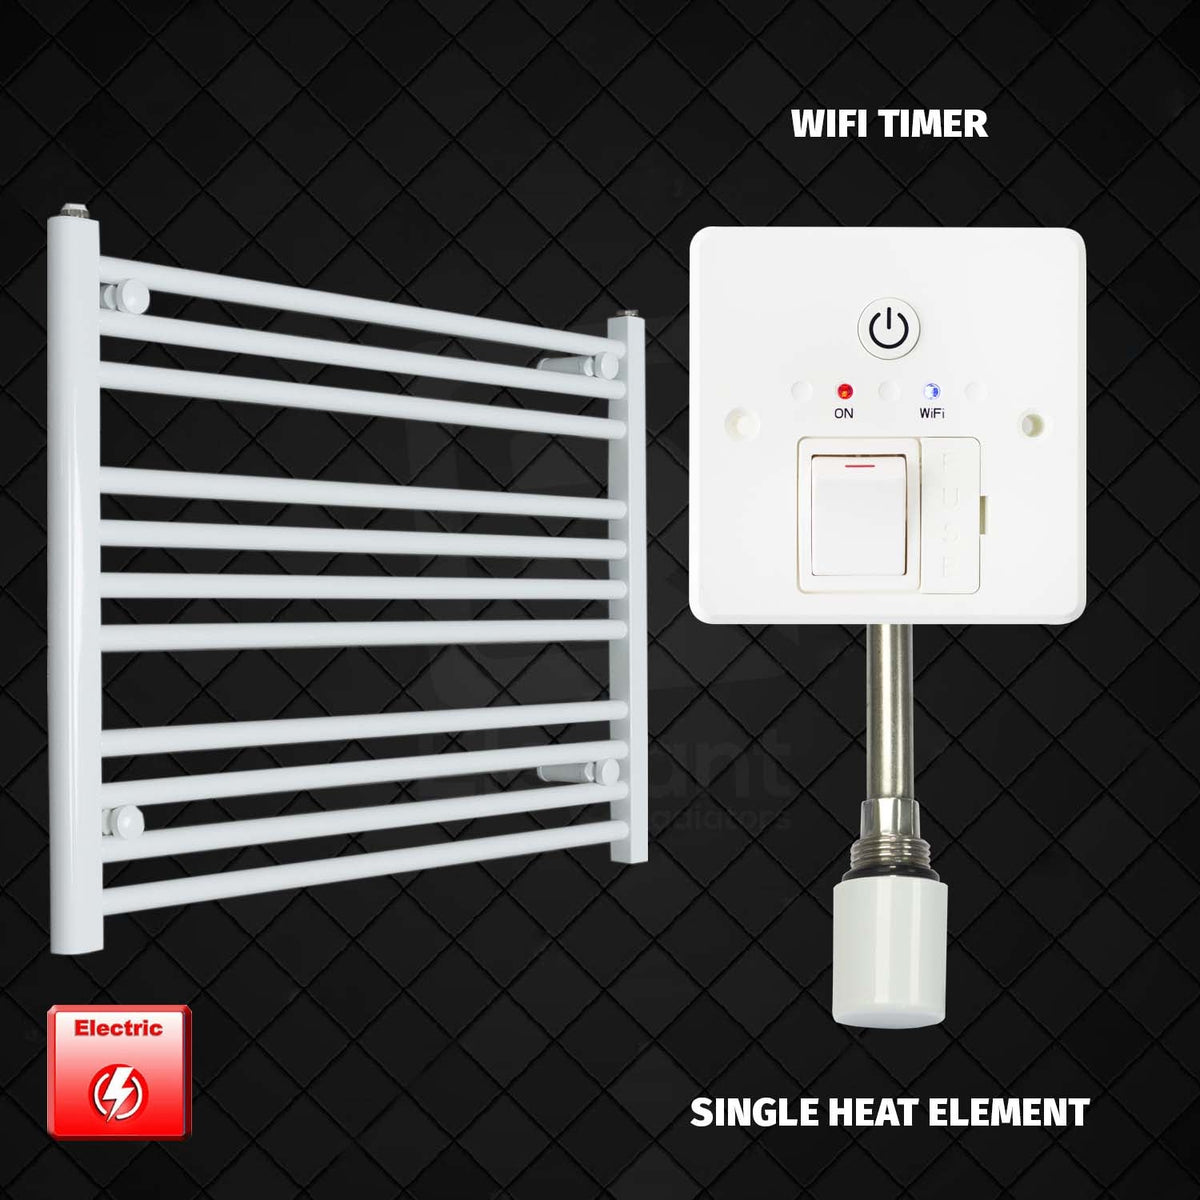 600 mm High 750 mm Wide Pre-Filled Electric Heated Towel Radiator White HTR Single heat element Wifi timer